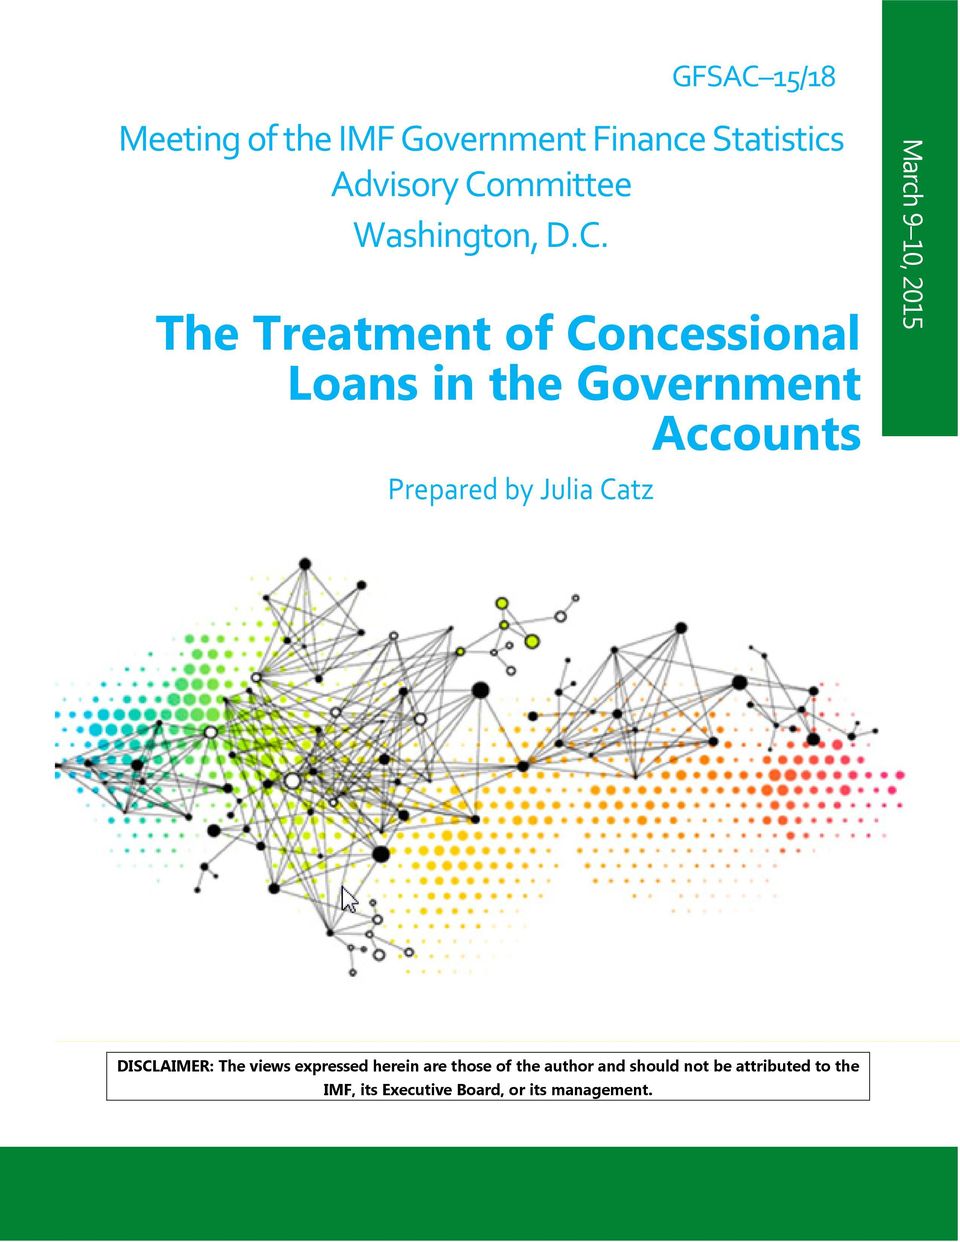 The Treatment of Concessional Loans in the Government Accounts Prepared by Julia Catz